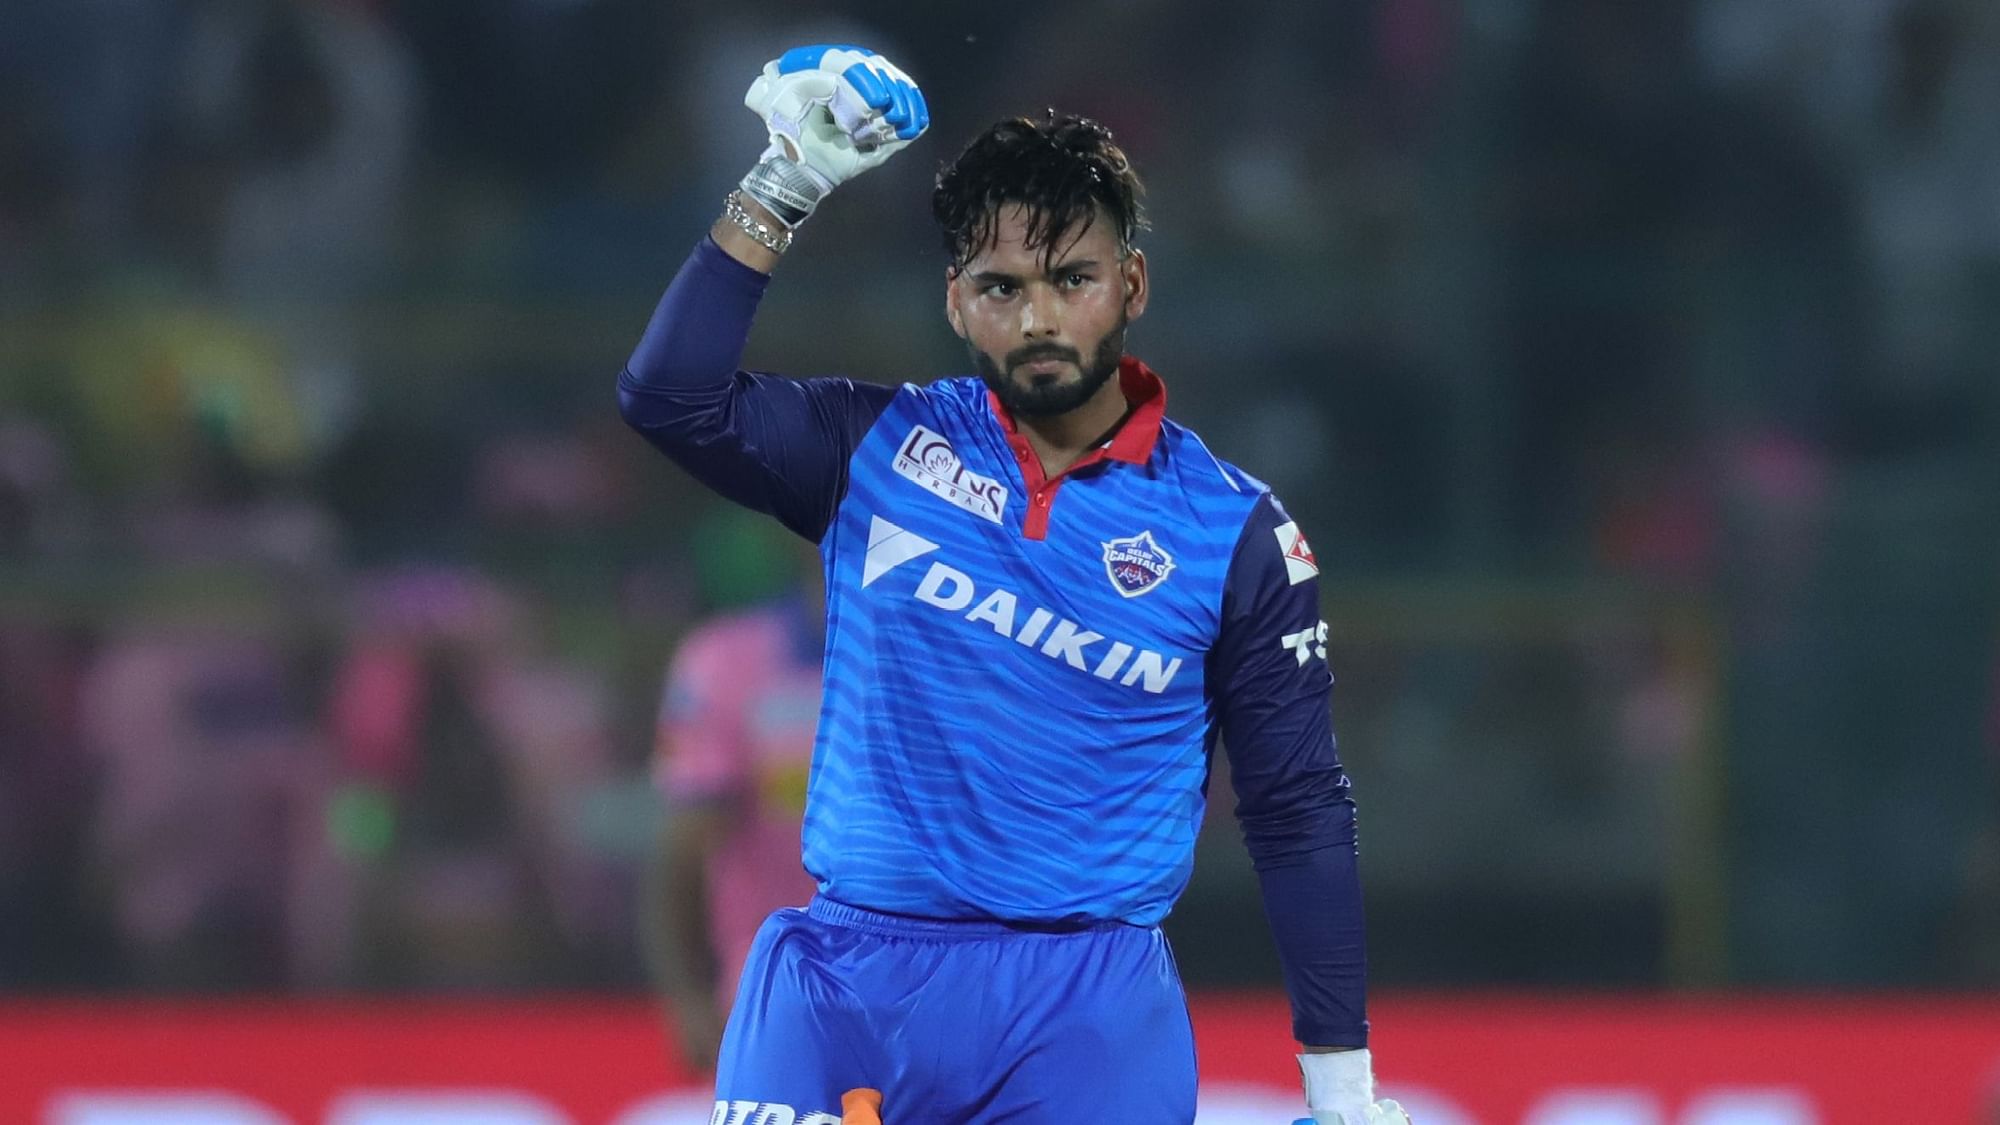 Delhi Capitals’ Rishabh Pant slammed a 36-ball 78 not out to score his second fifty of the IPL 2019.